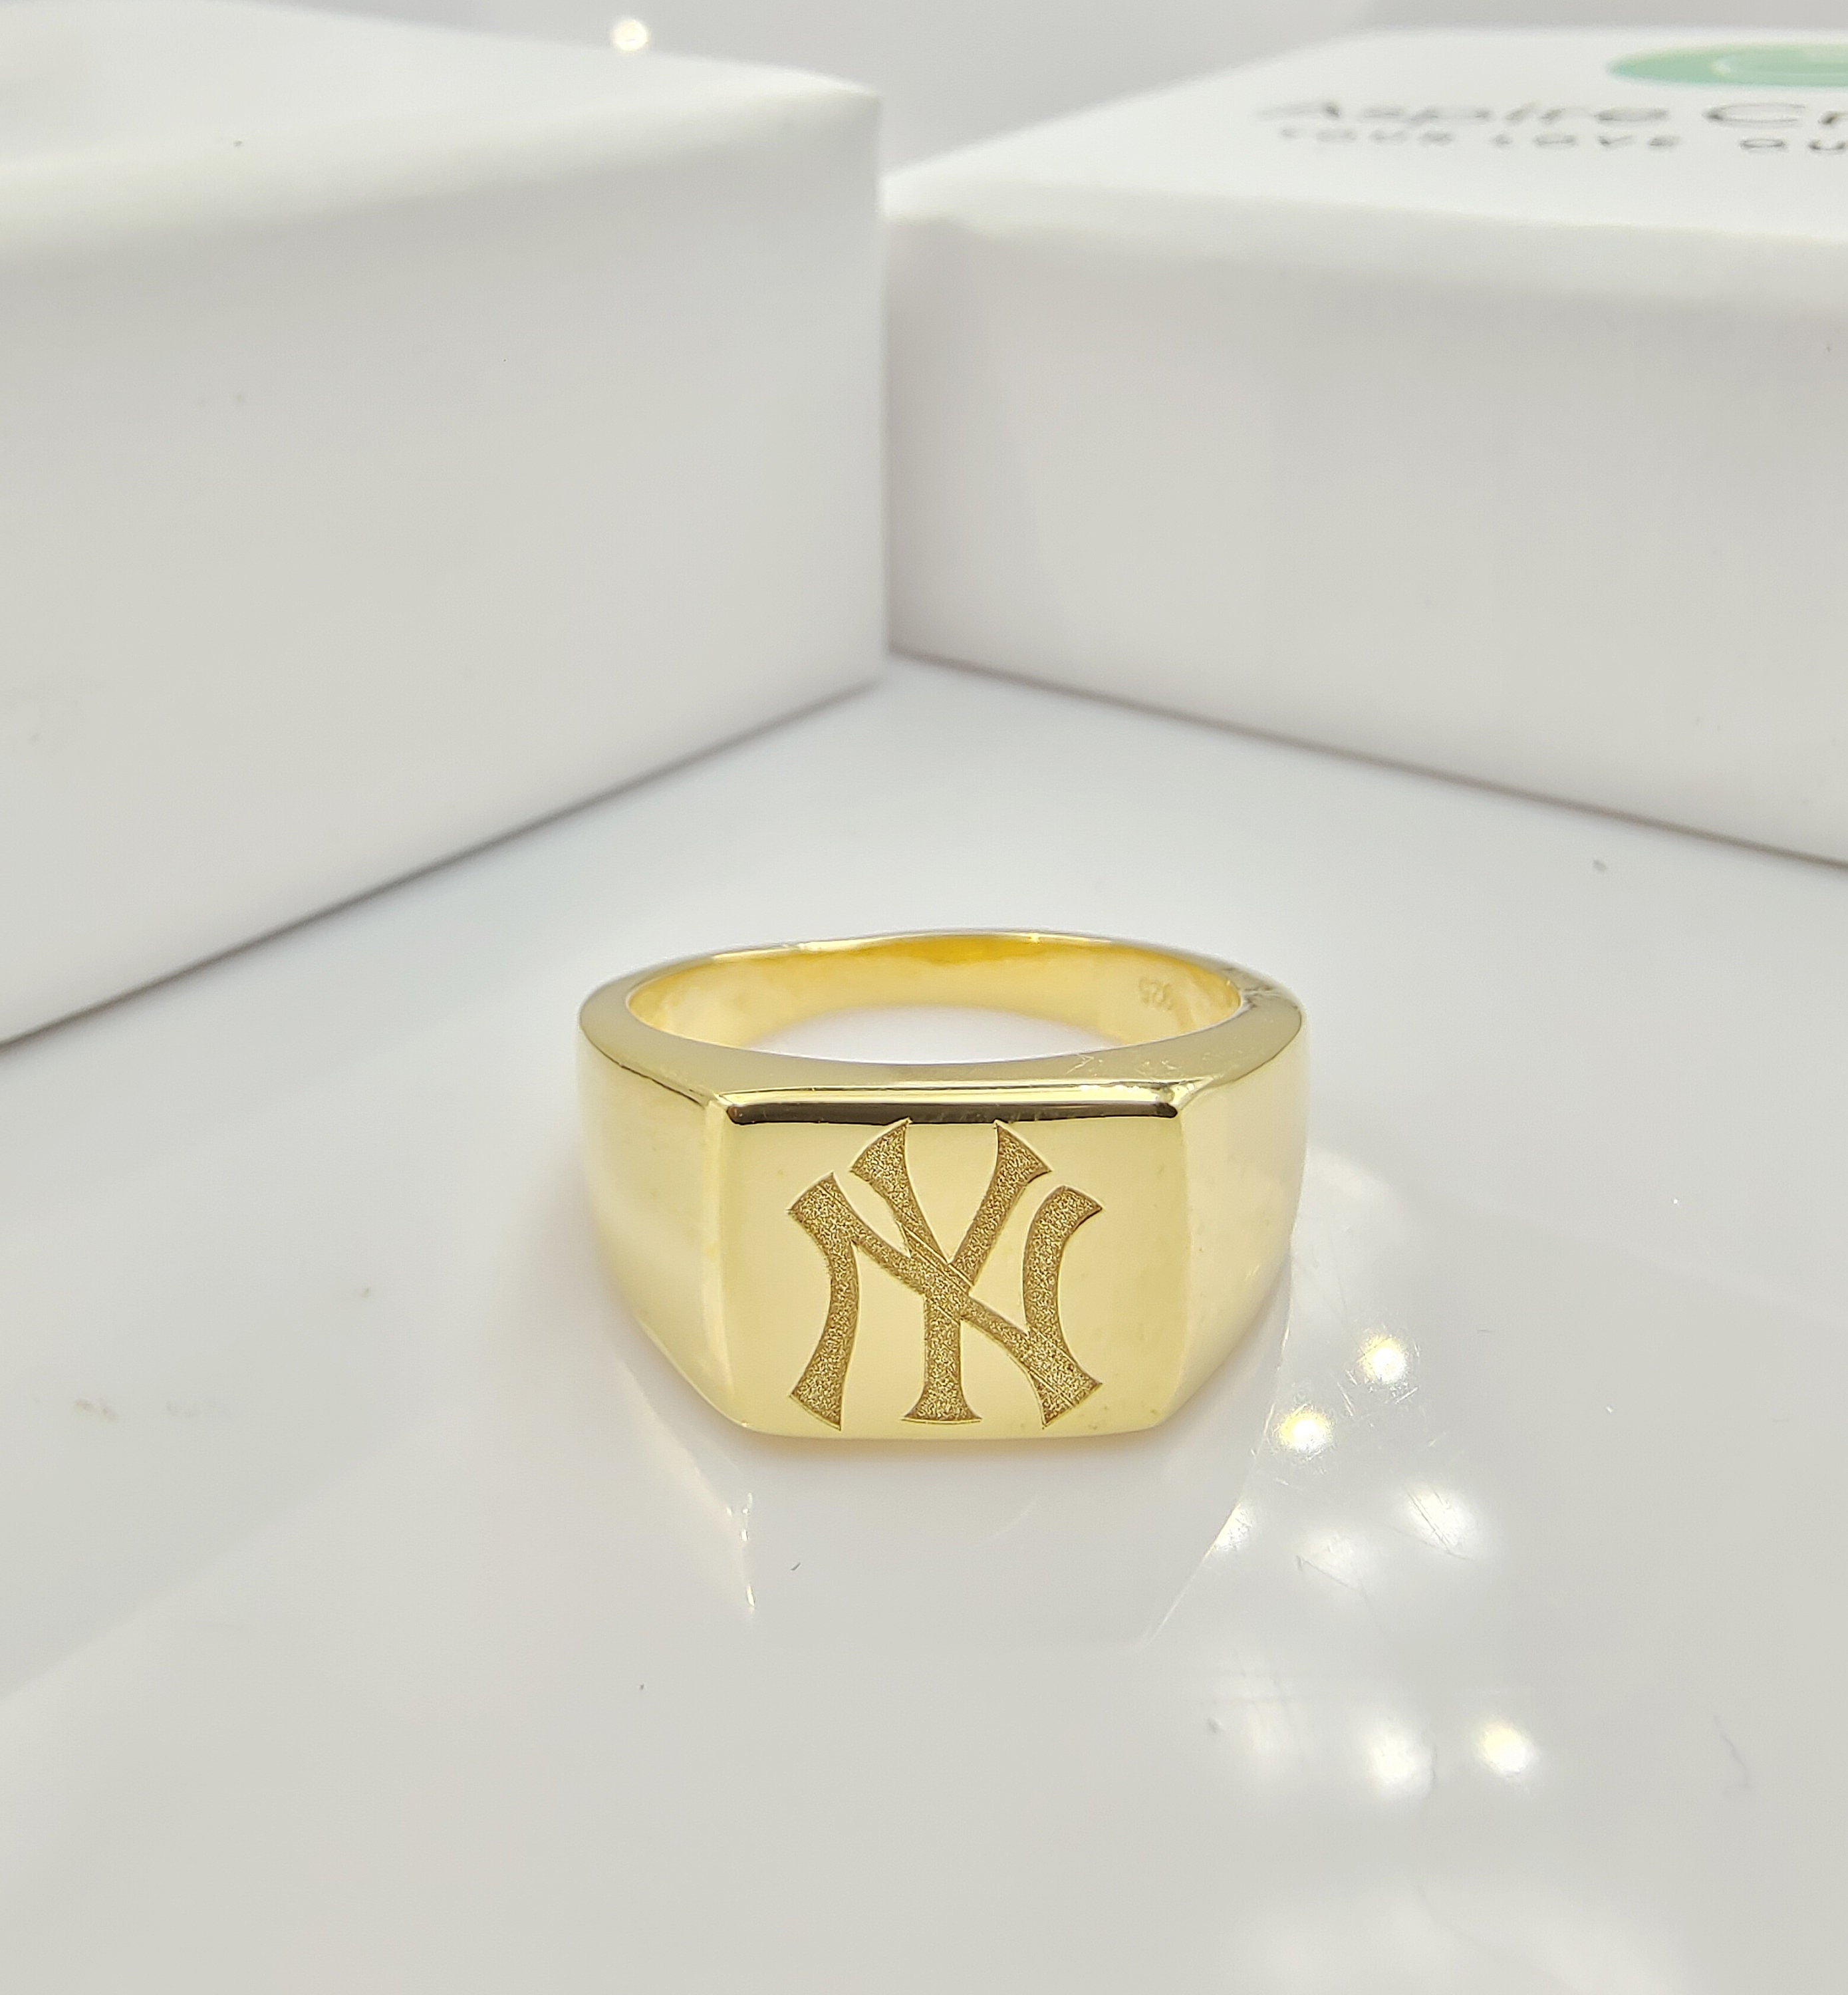 MLB Championship Ring New York Yankees 2000 World Series  Championship  Rings for Sale Cheap in United States